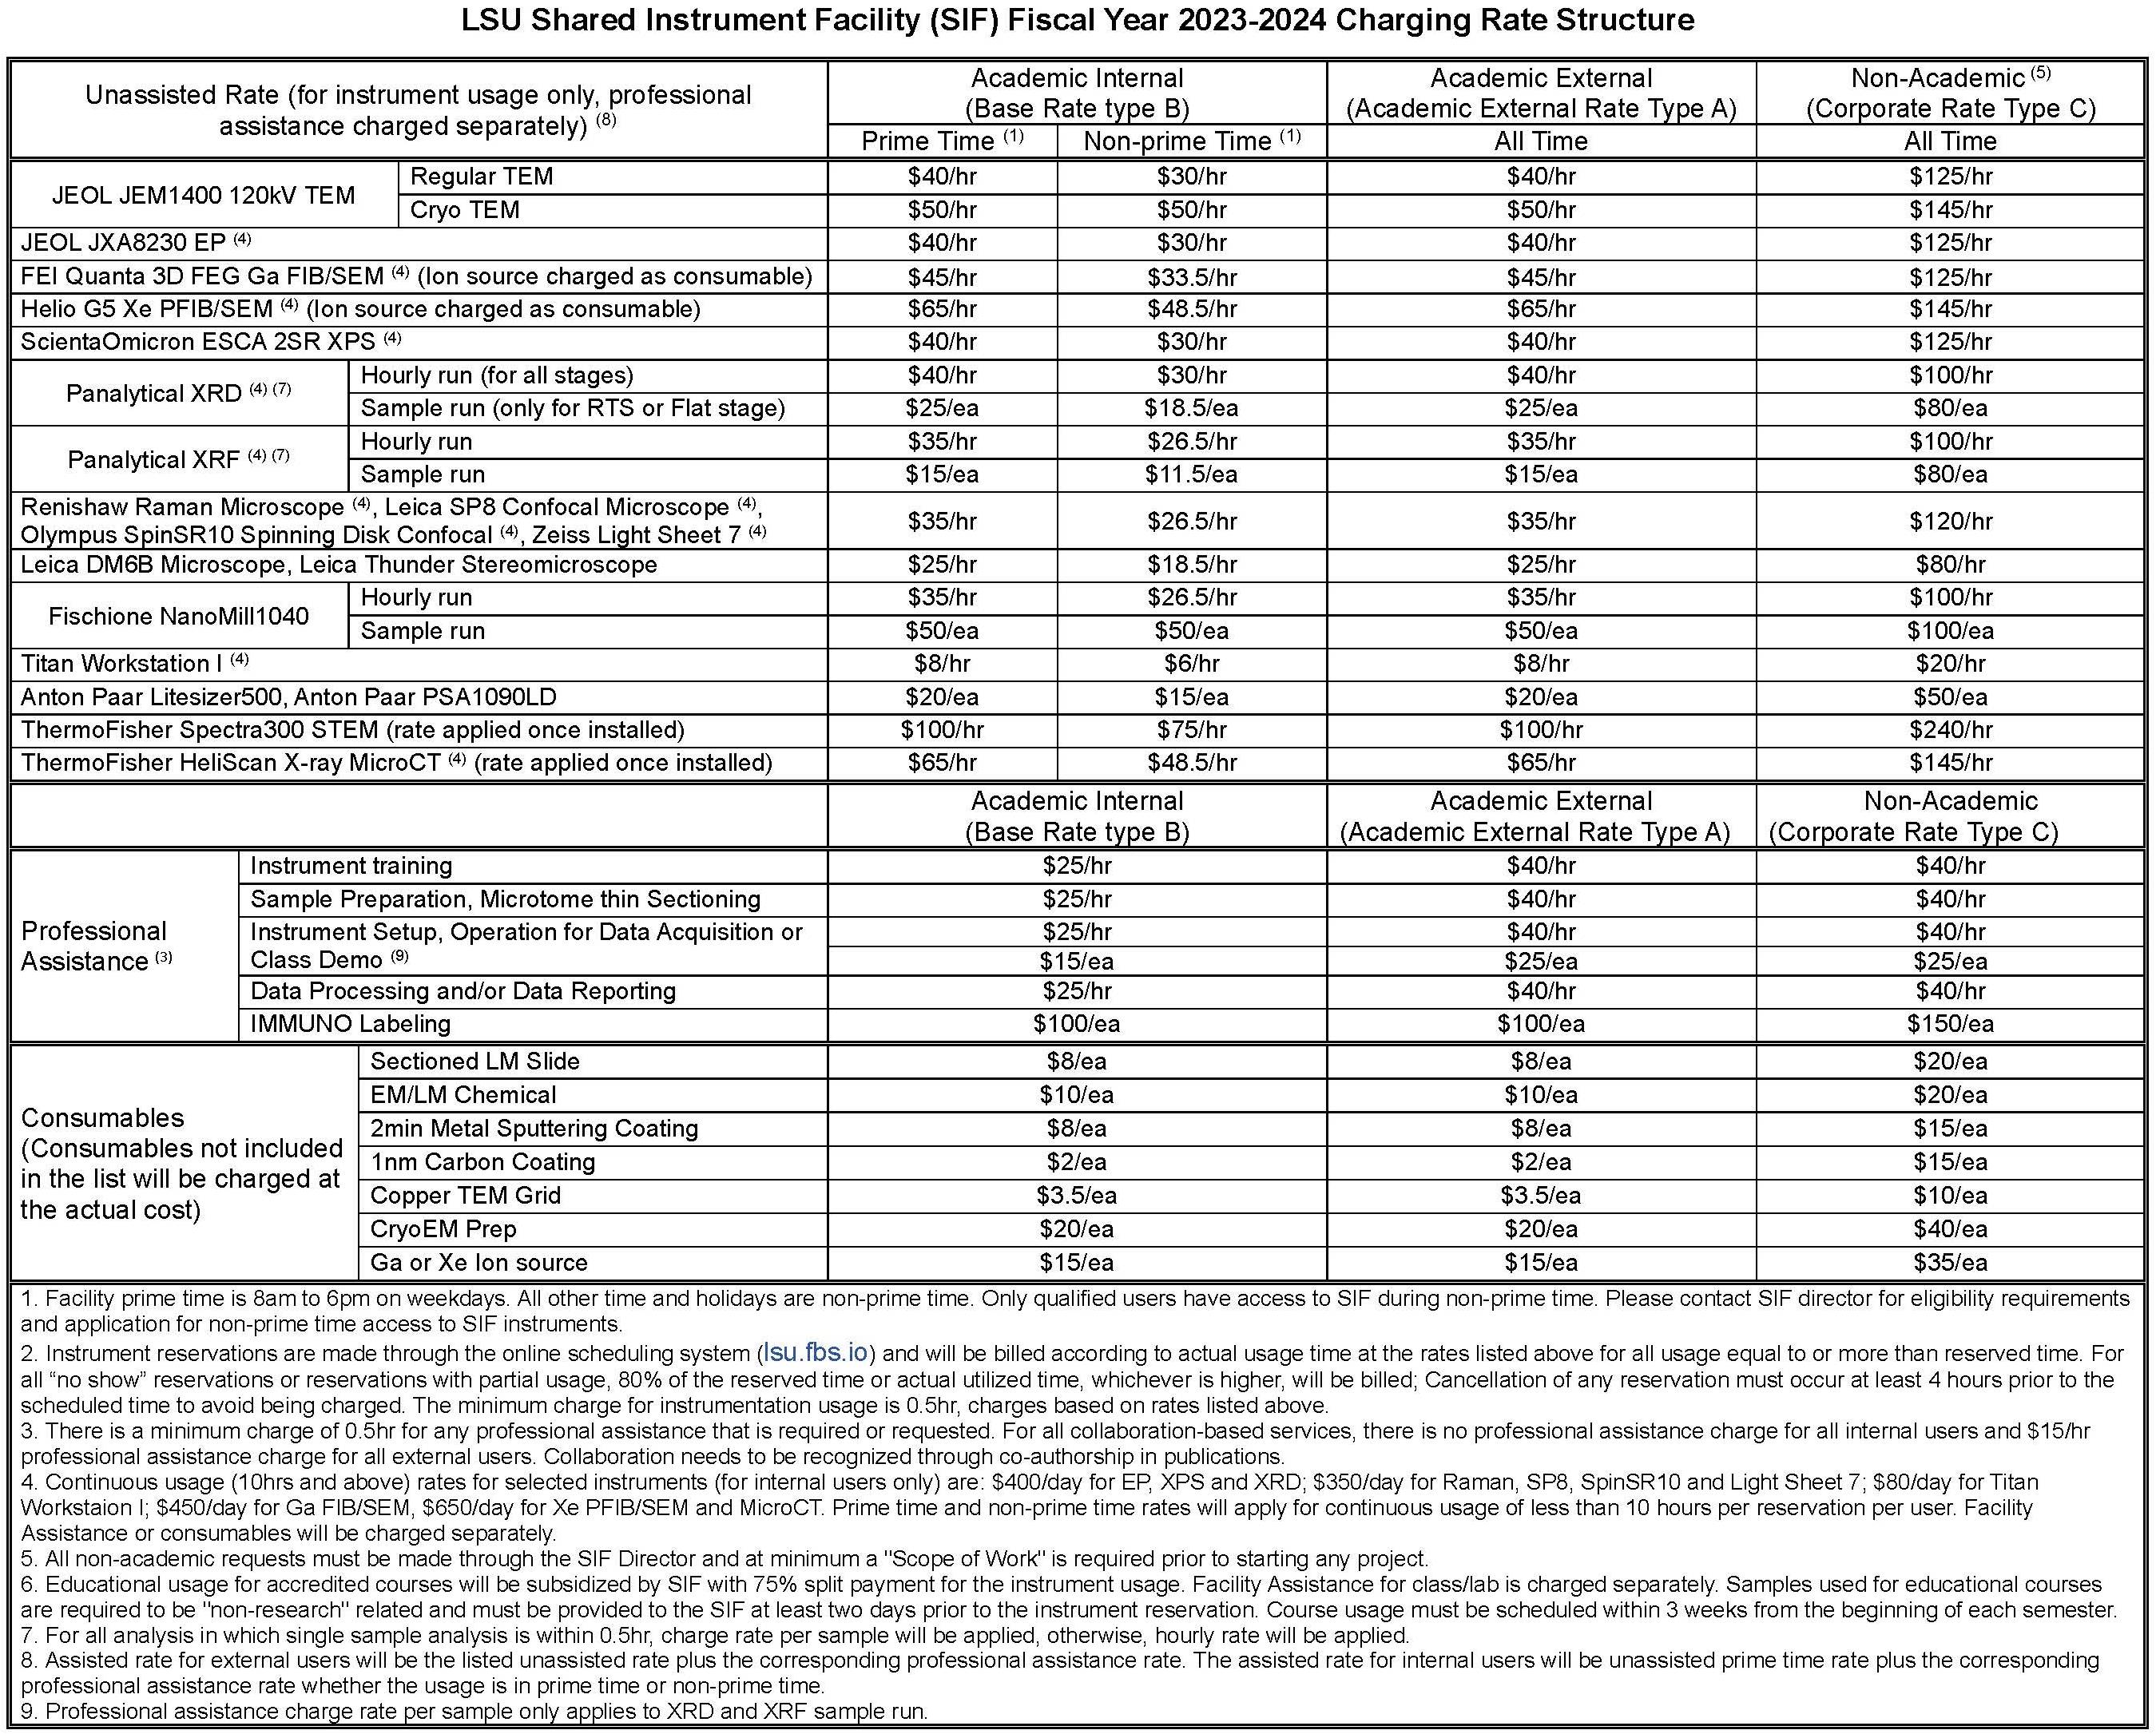 LSU Shared Instrument Facility (SIF) Fiscal Year 2023-2024 Charging Rate Structure